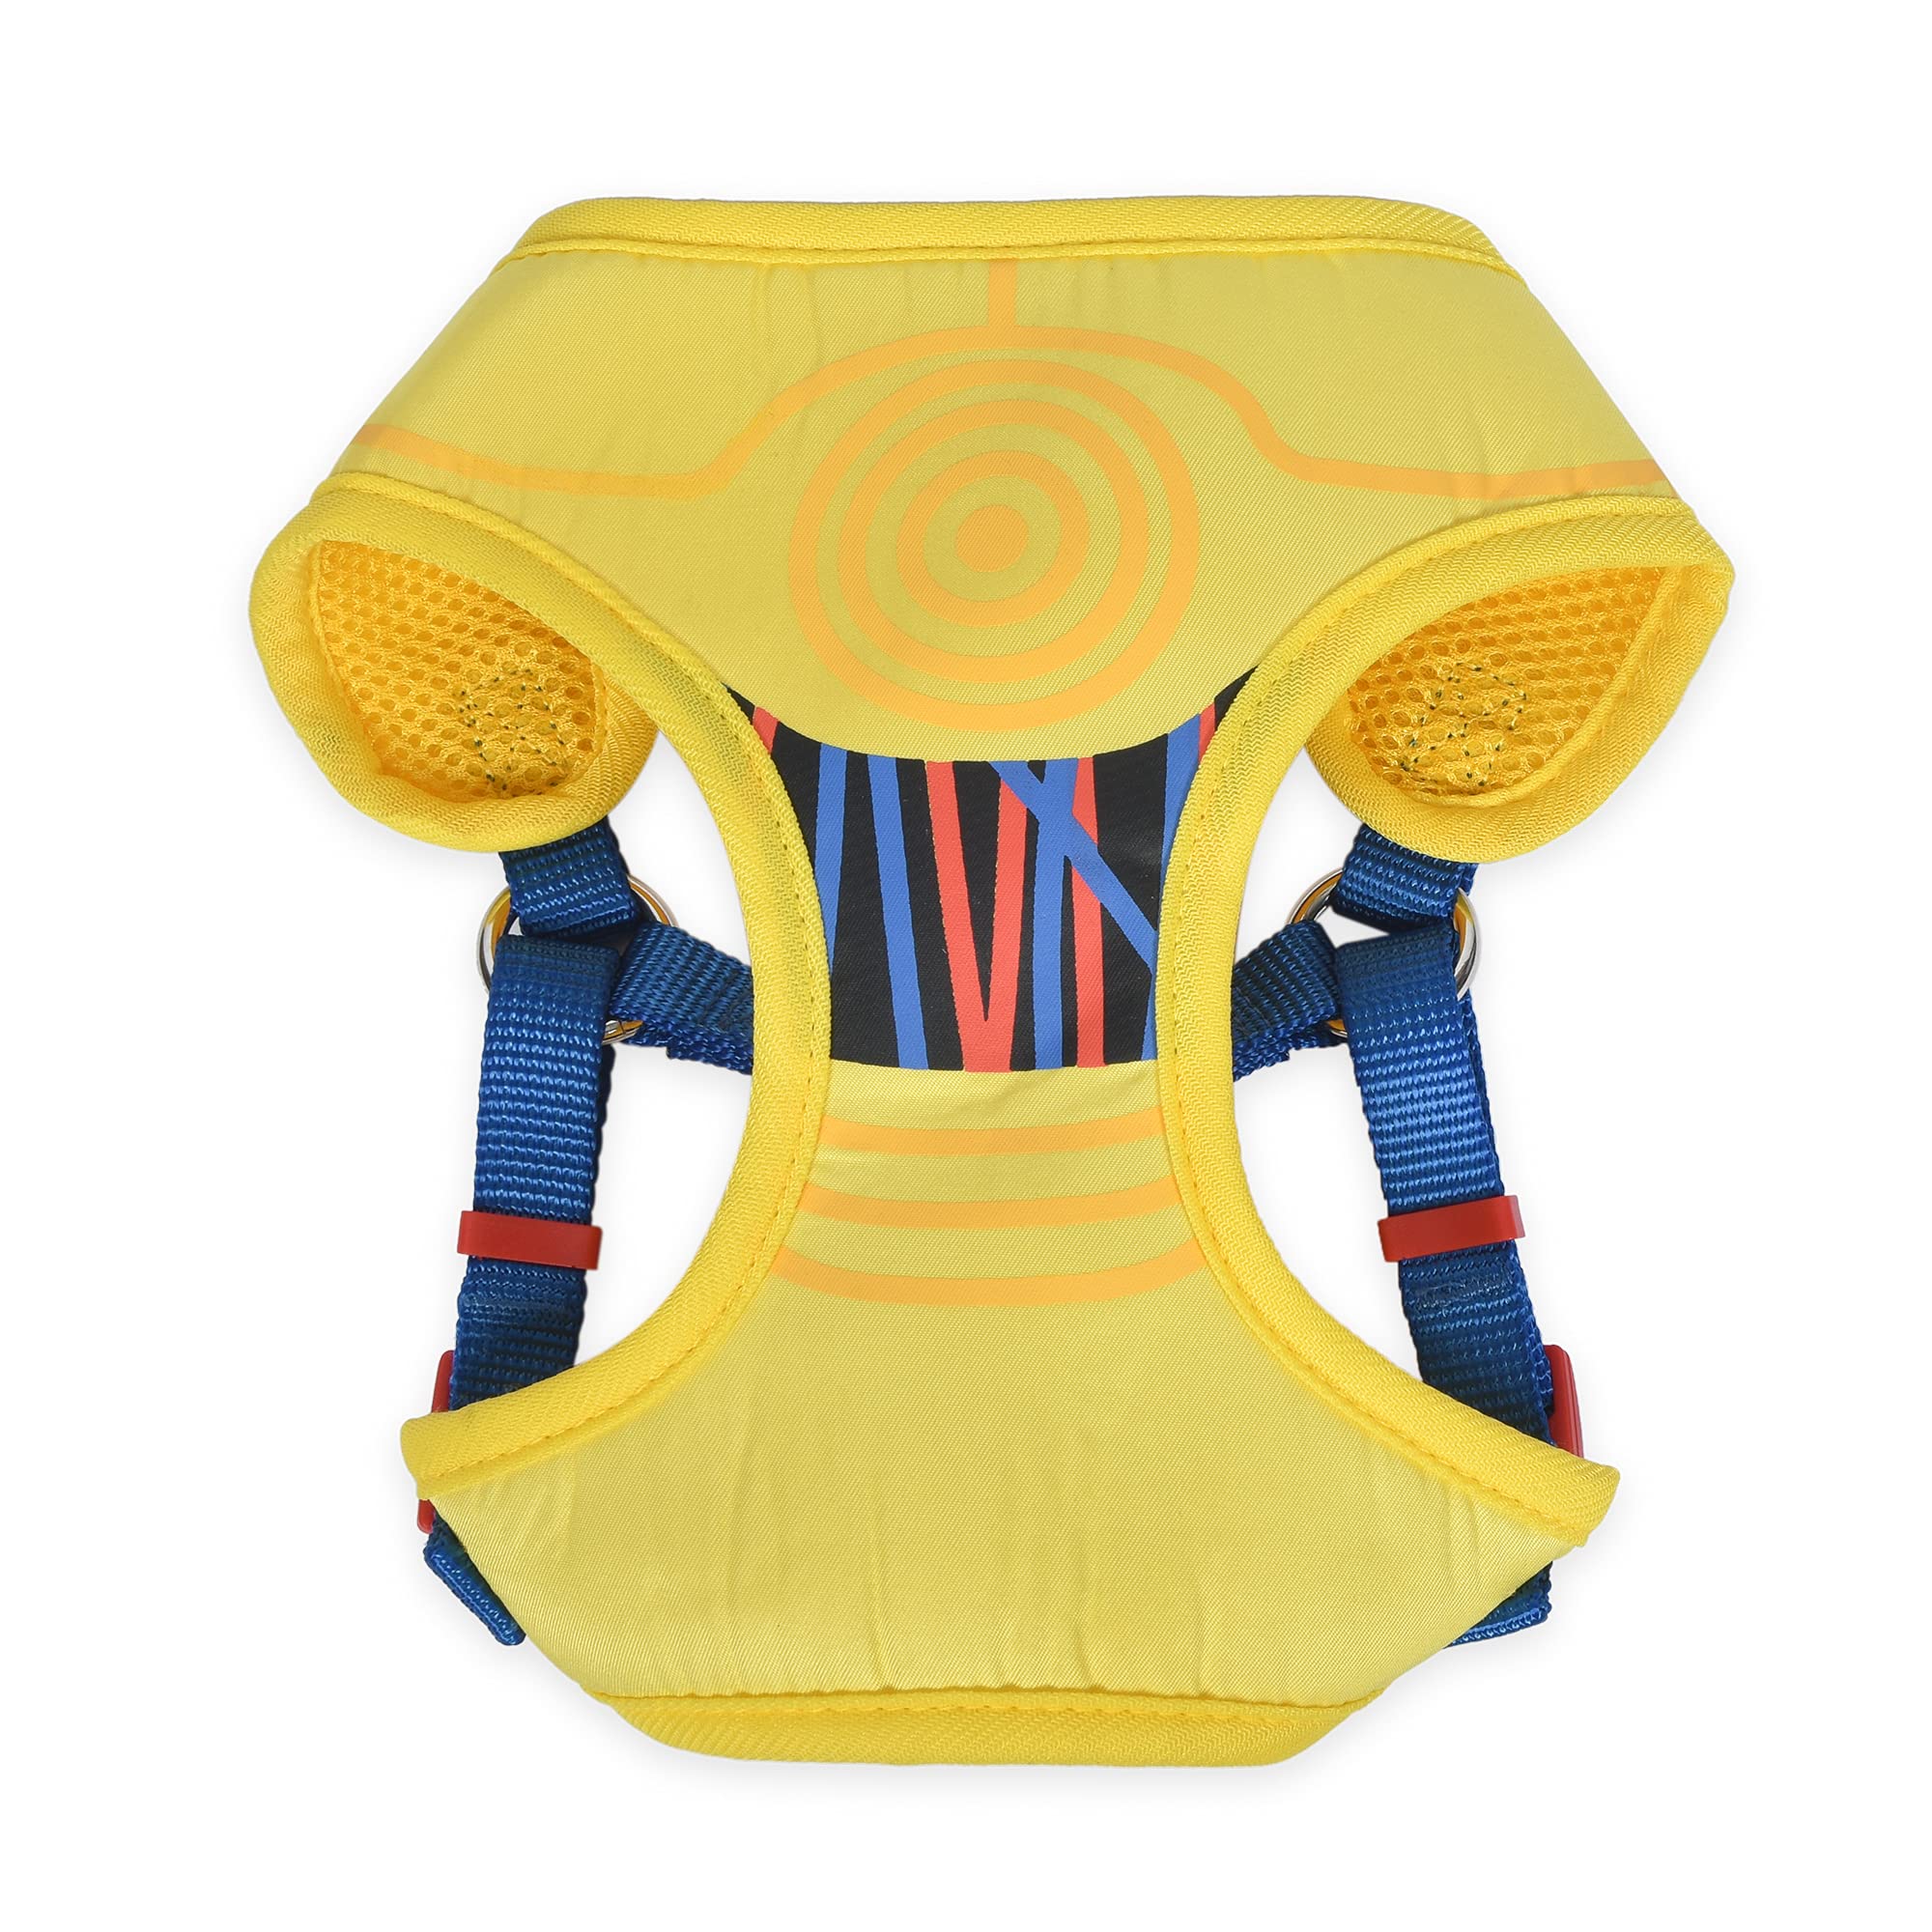 Star Wars C3PO Dog Harness (Large, FF18385) $4.80 + Free Shipping w/ Prime or on orders $25+